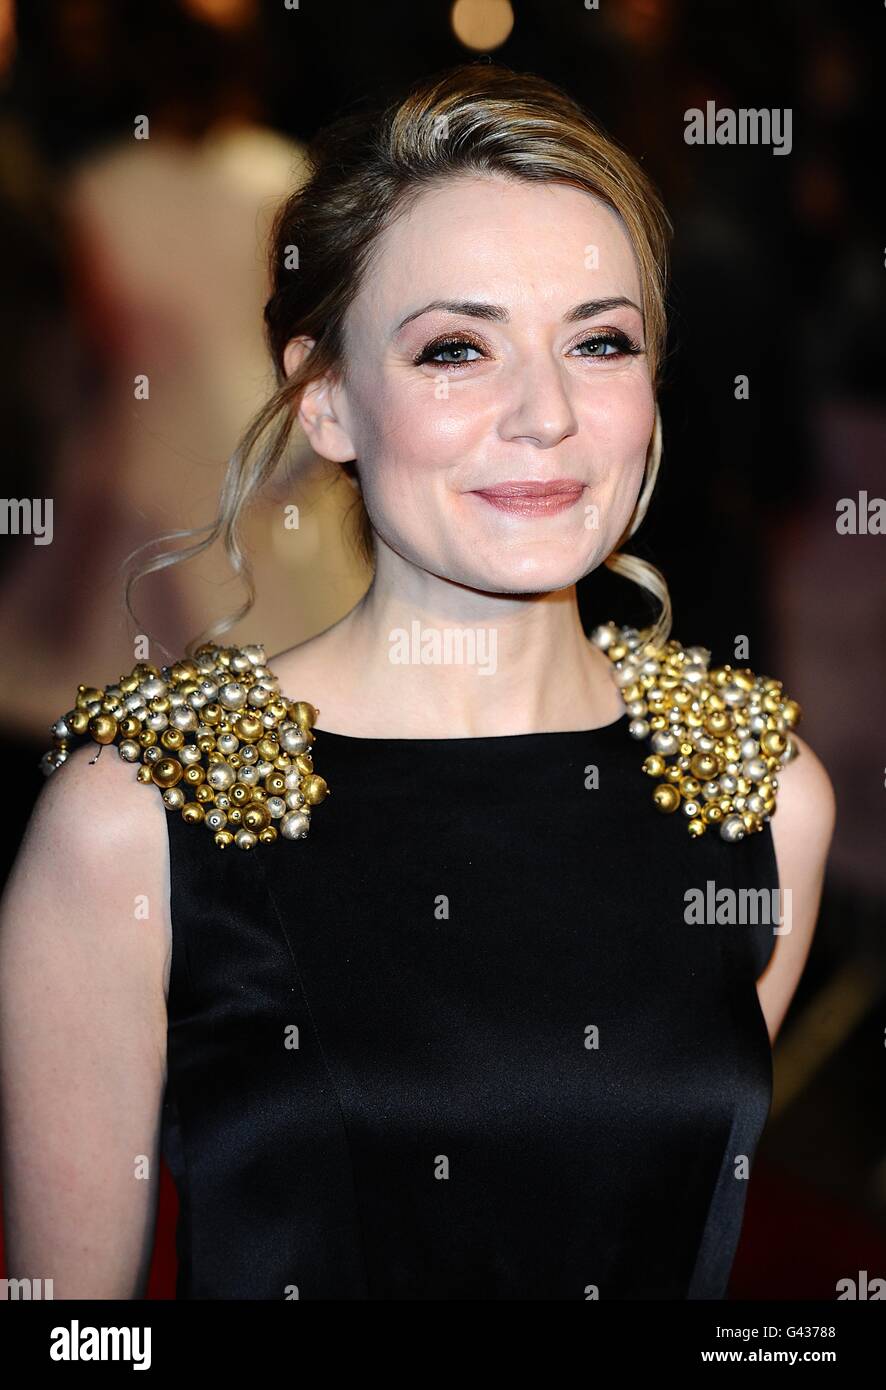 Christine Bottomley arriving for the London Critics' Circle Film Awards at the BFI Southbank, Belvedere Road, London. Stock Photo